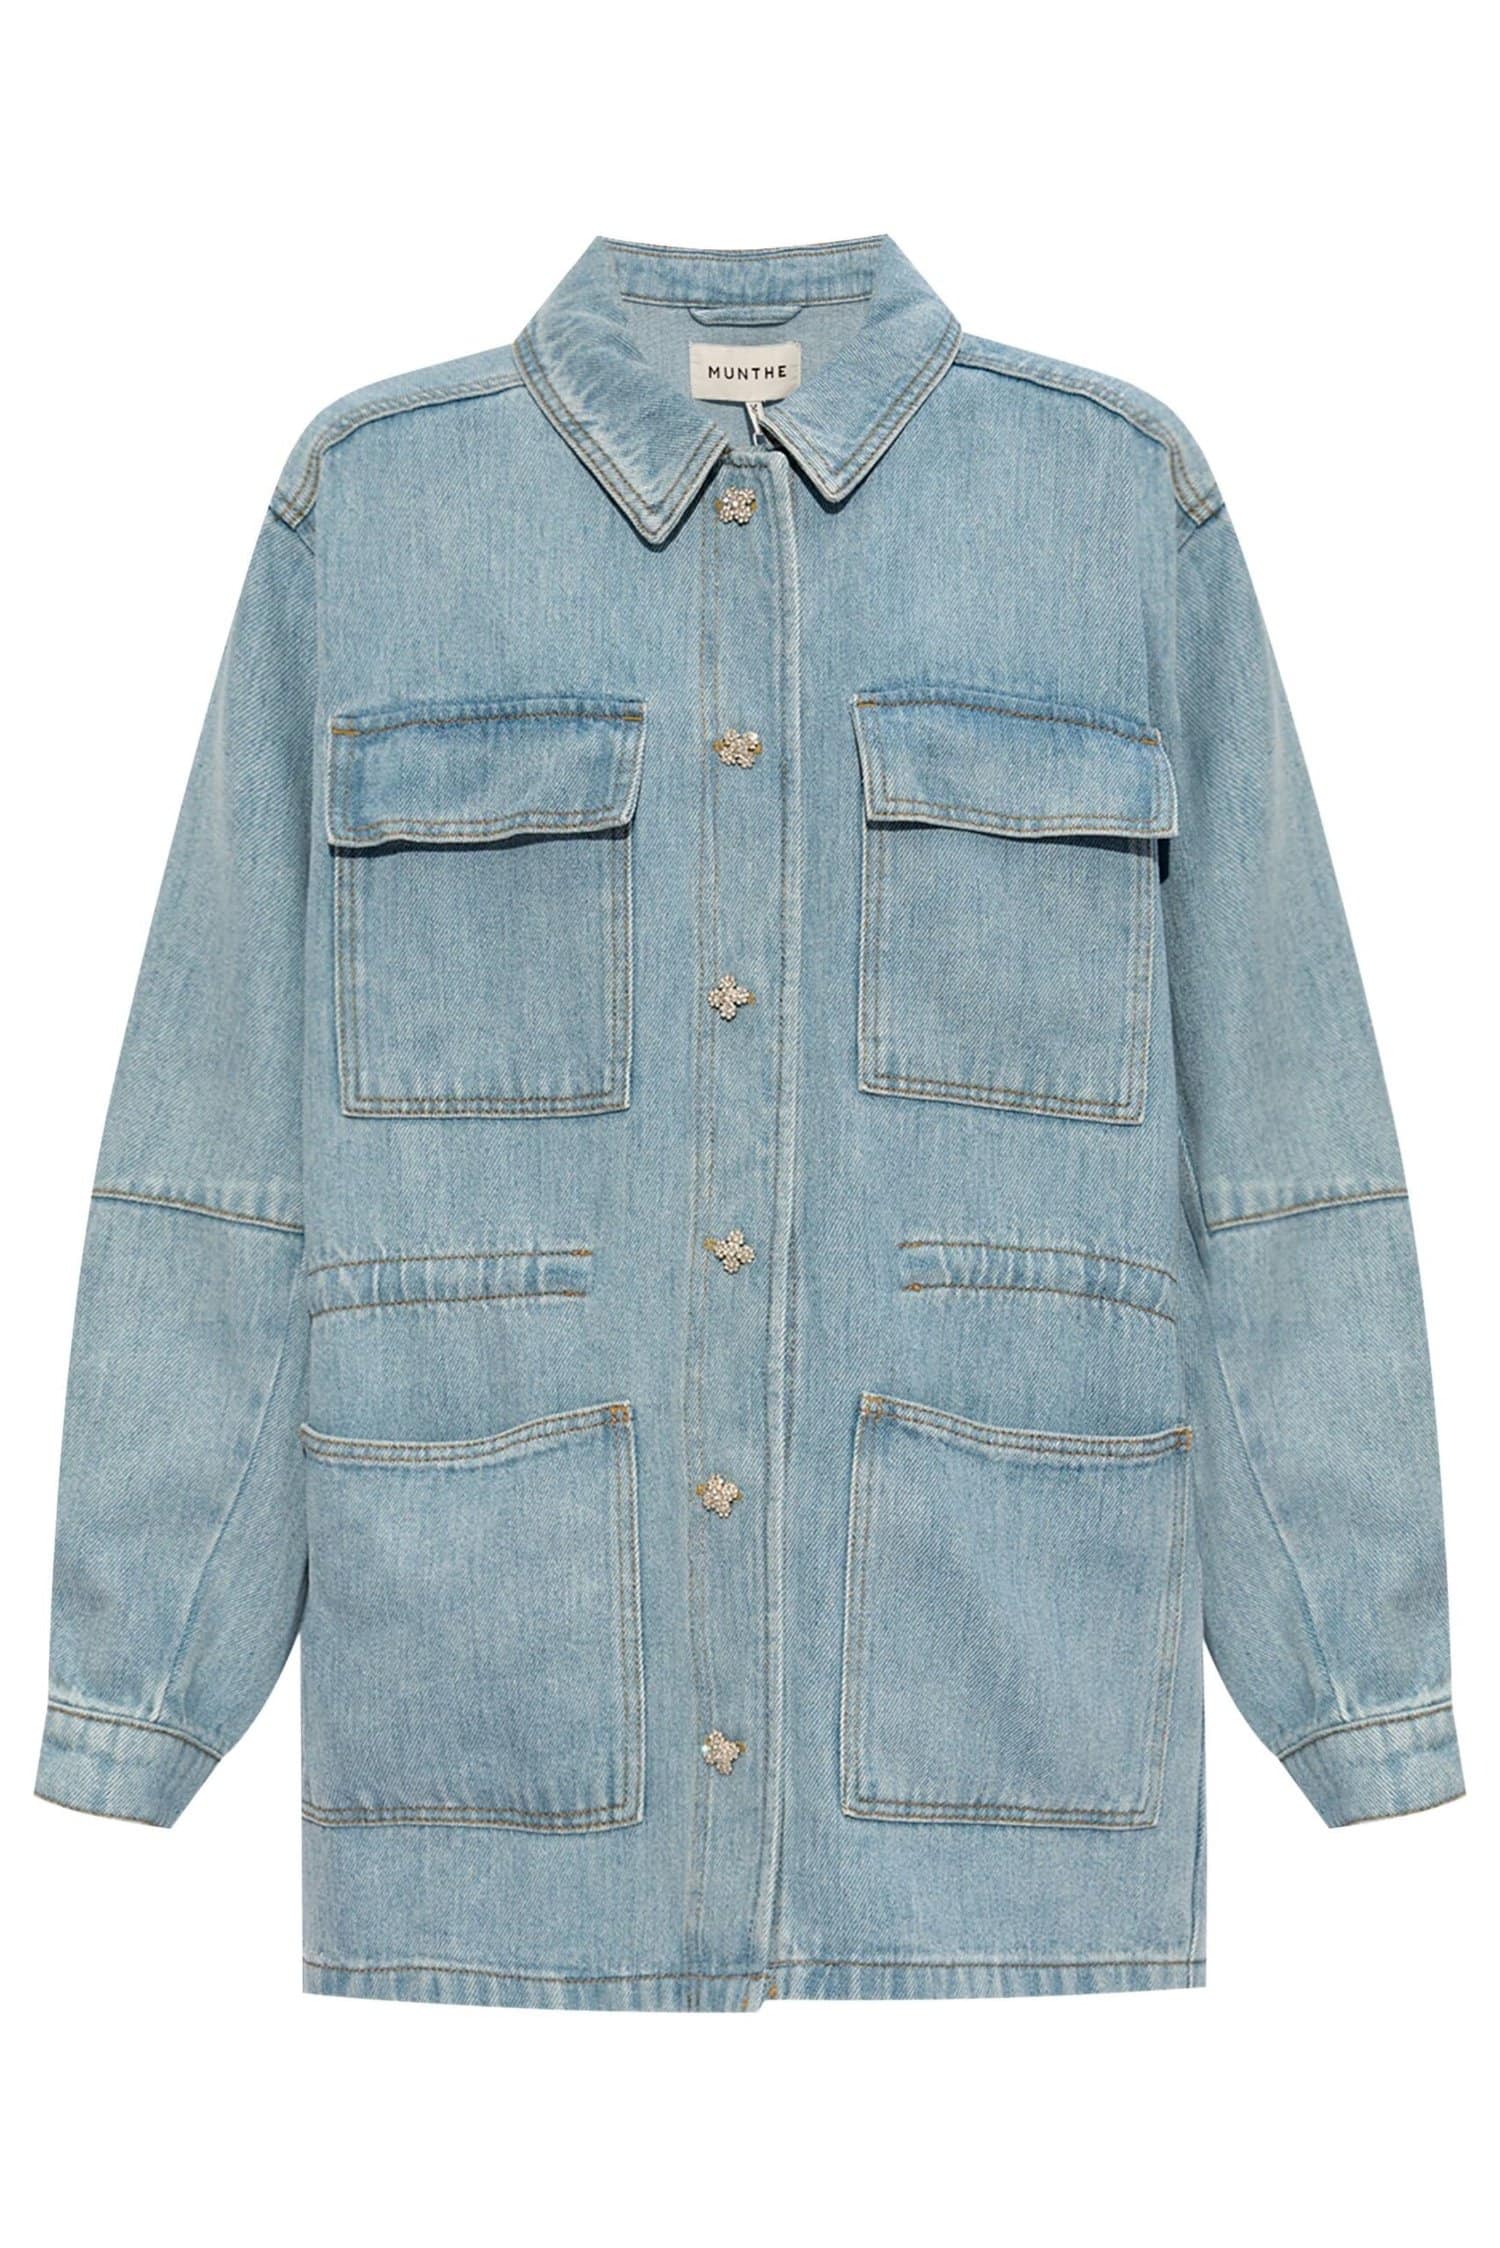 Munthe, denim, jacket, Mother's Day, Mother's Day gift guide, gifts, Mother's Day 2024